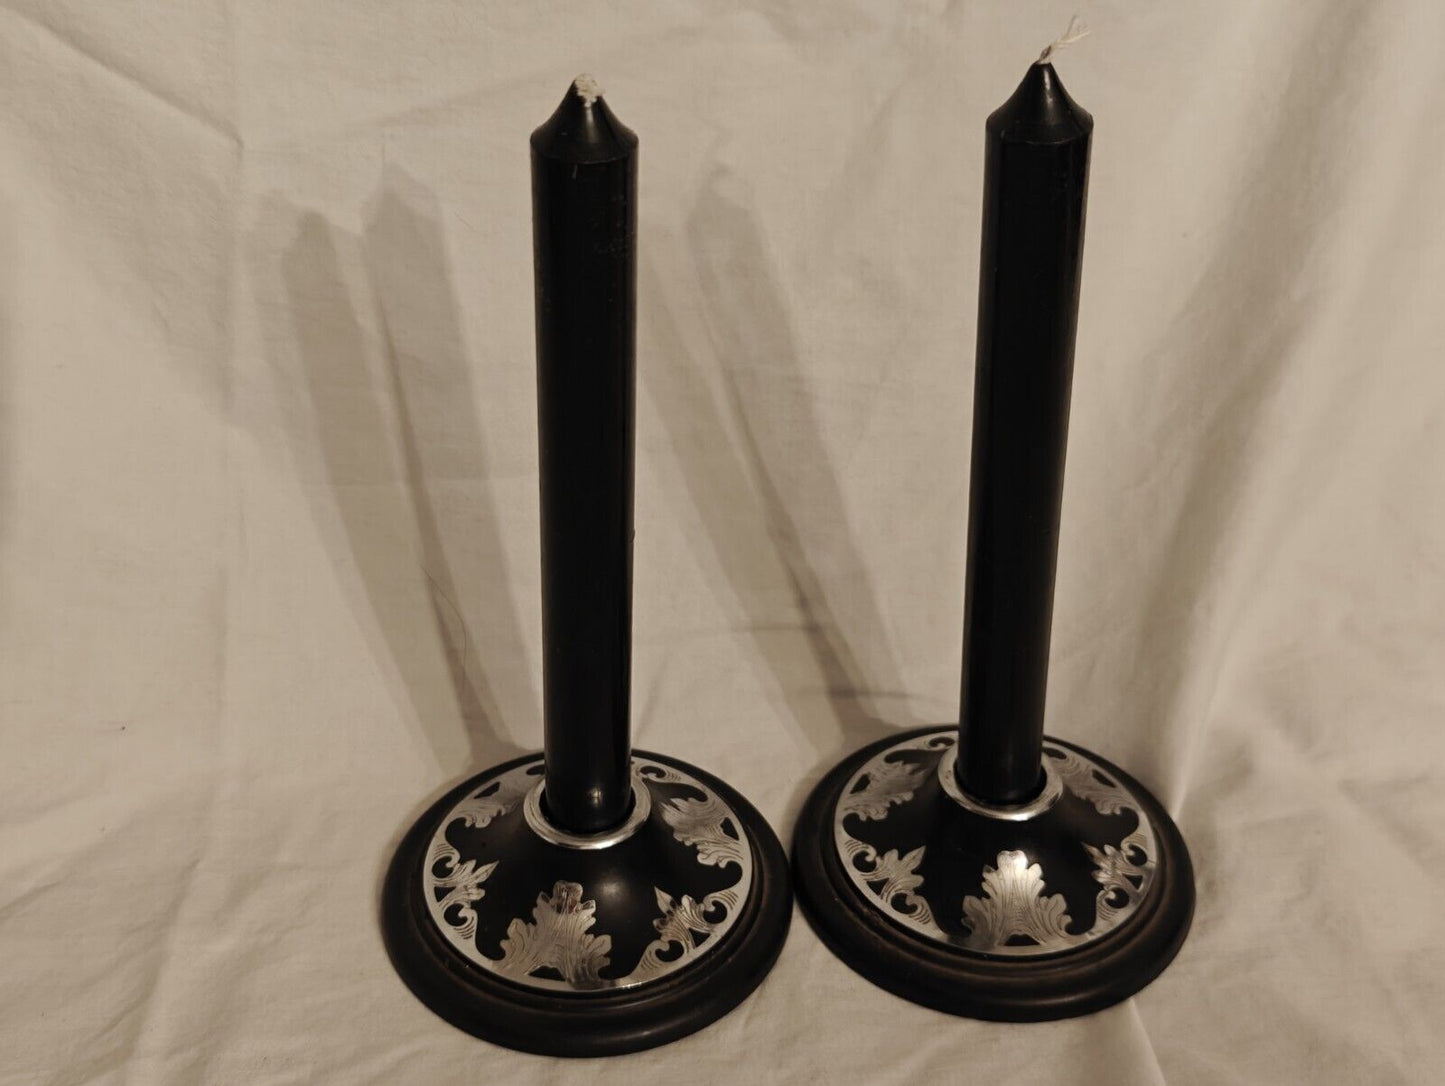 Two Satin Black Harvite/Silver Inlaid Candle Holders